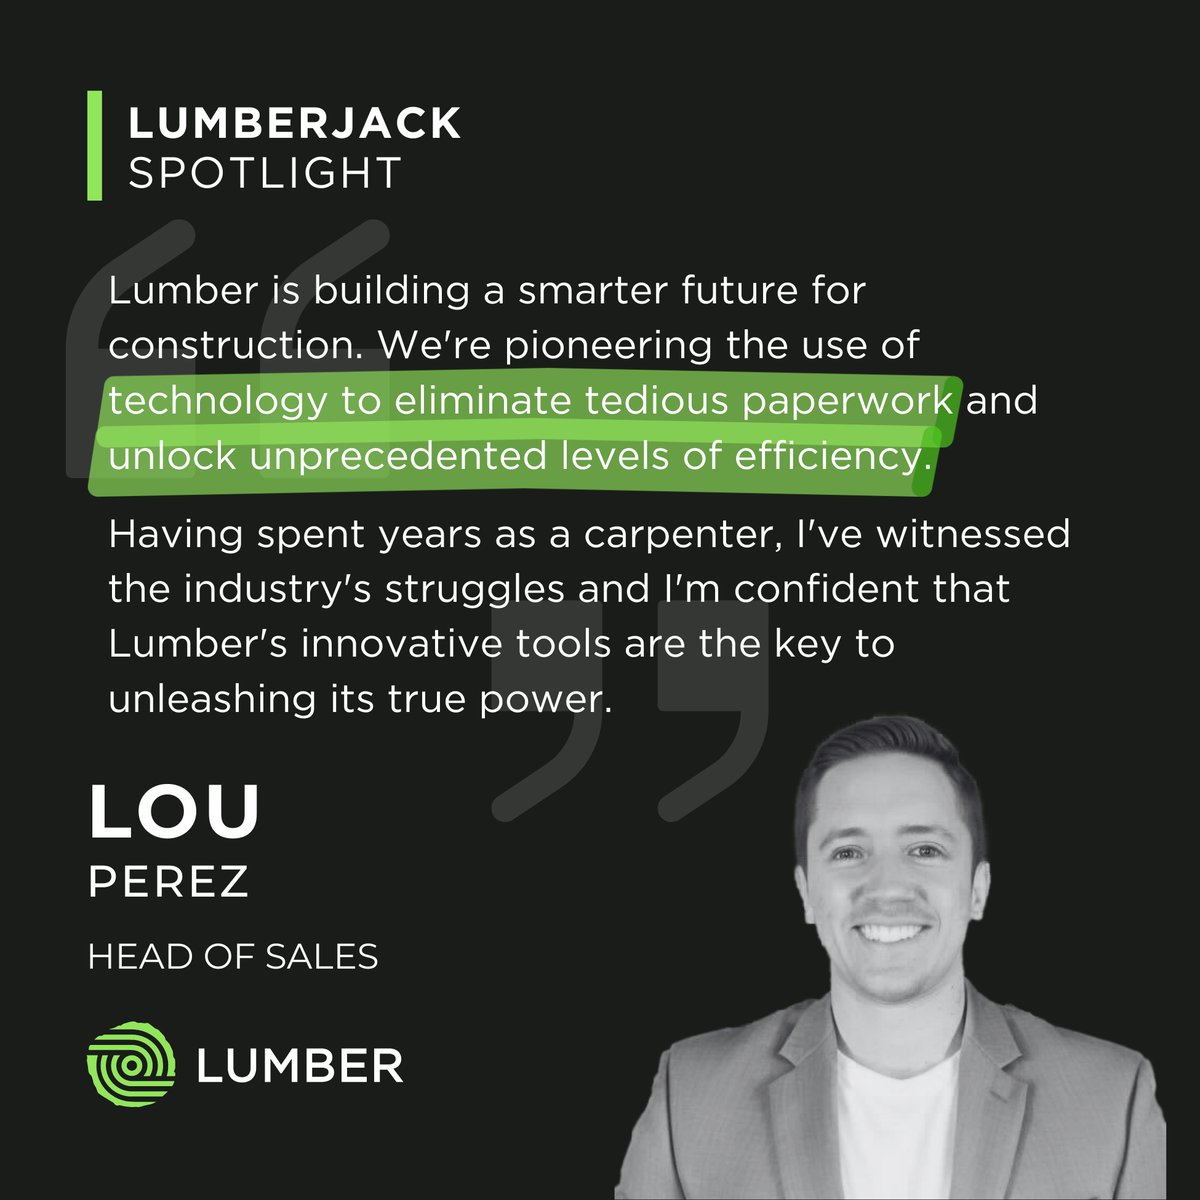 #LumberjackSpotlight 🪵🔦

Meet Lou Perez, our Head of Sales at Lumber - a former carpenter with a passion for revolutionizing the construction industry. 🌟

#LumberjackSpotlight #MeetTheTeam #Leadership